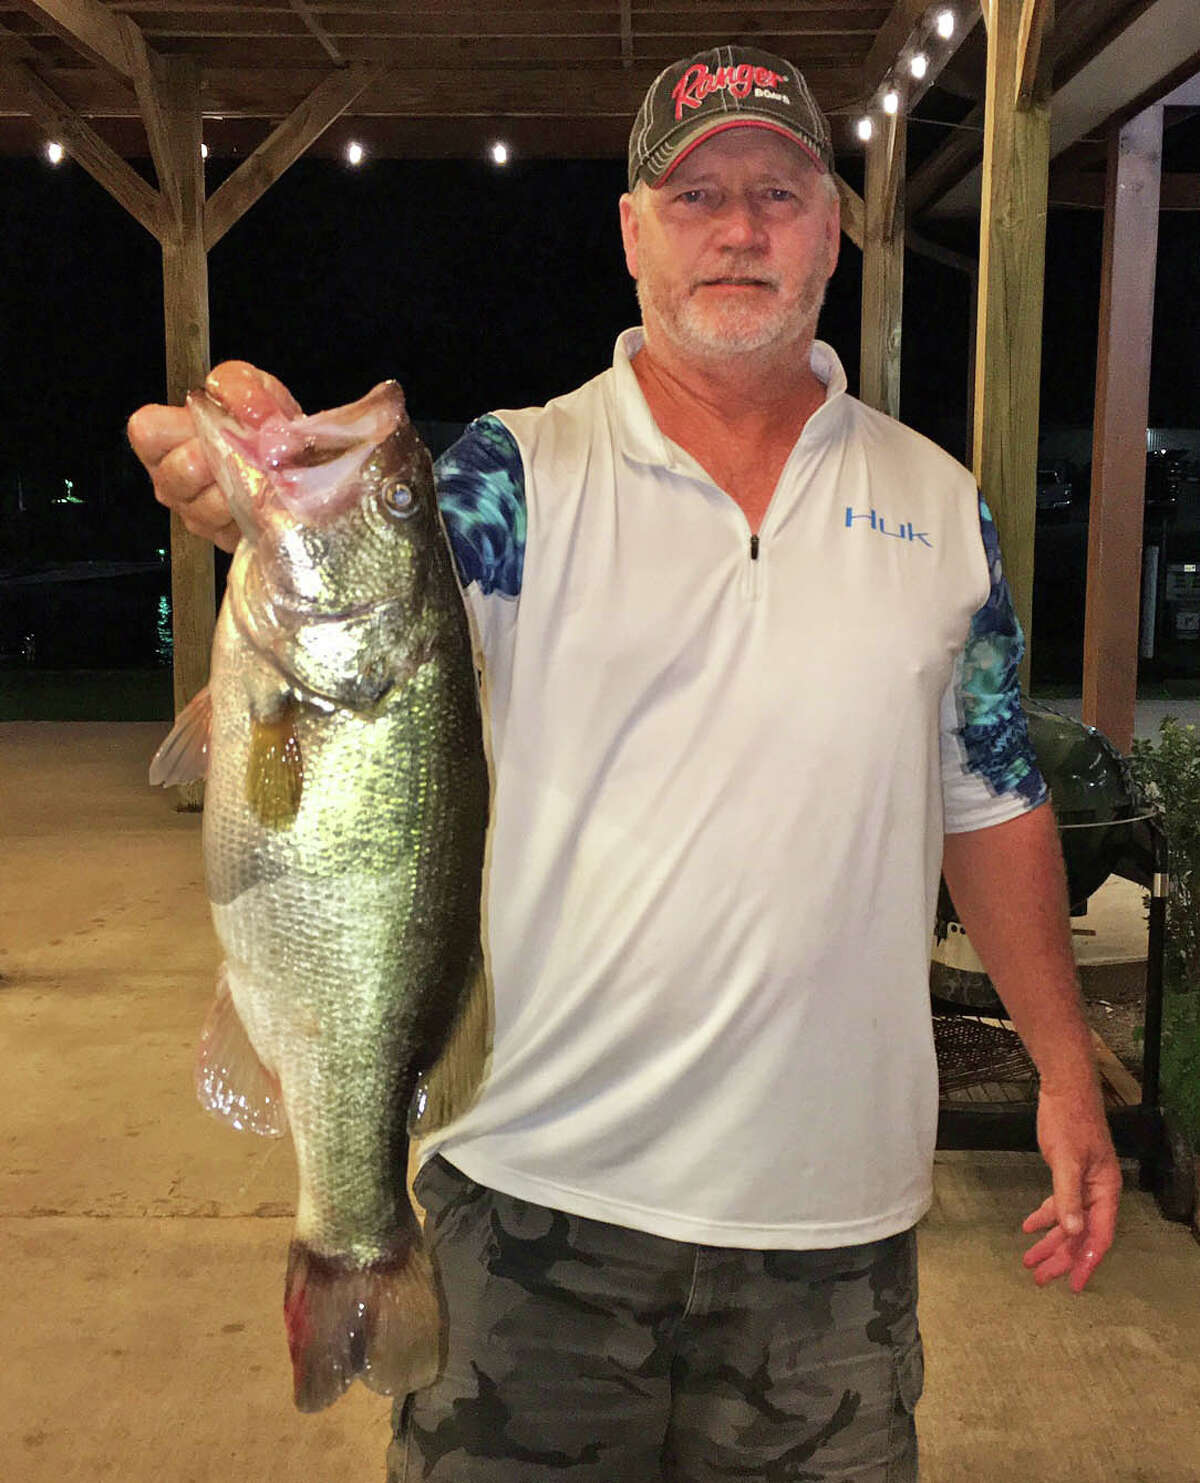 Tim Carlson came in first place in the CONROEBASS Thursday Night Big Bass Tournament with a weight of 6.77 pounds.